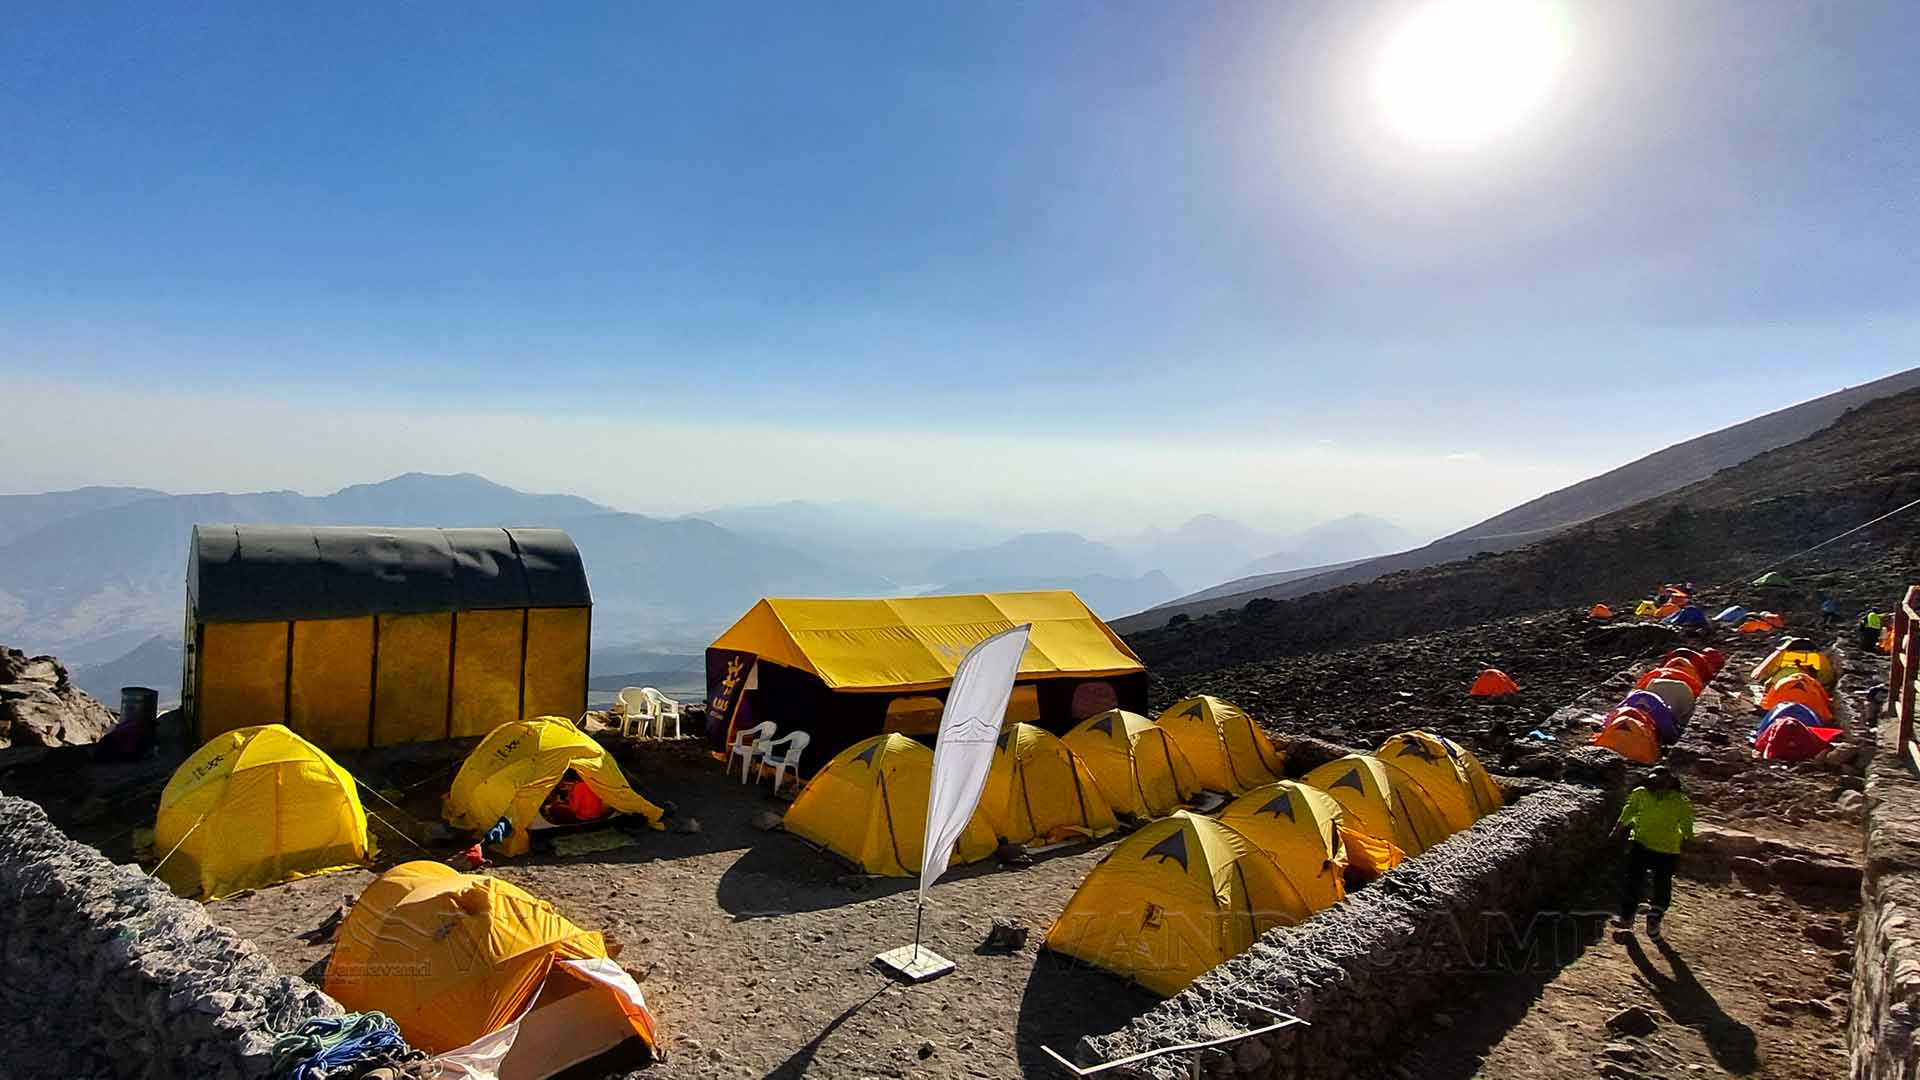 Tents provided by the Mount Damavand Group at Camp 3 on Mount Damavand.